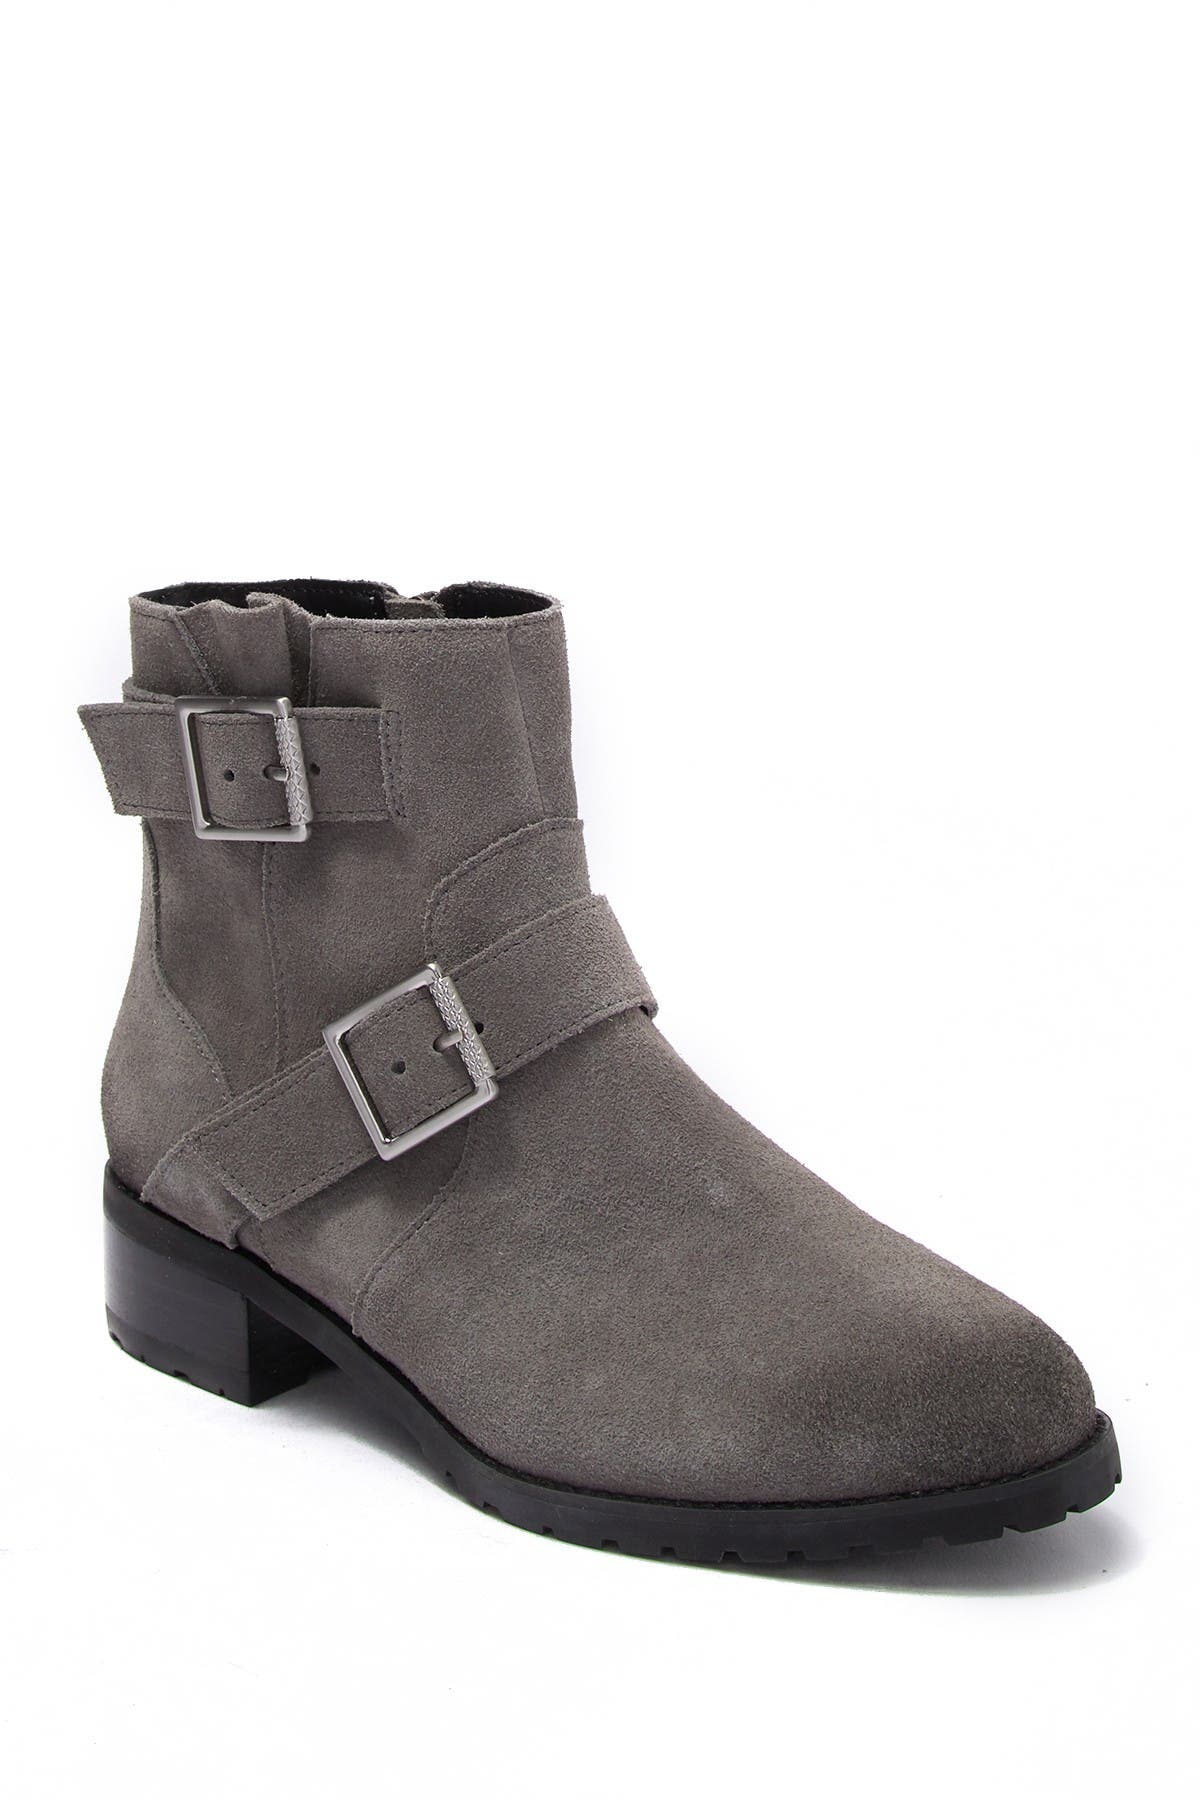 water resistant suede boots